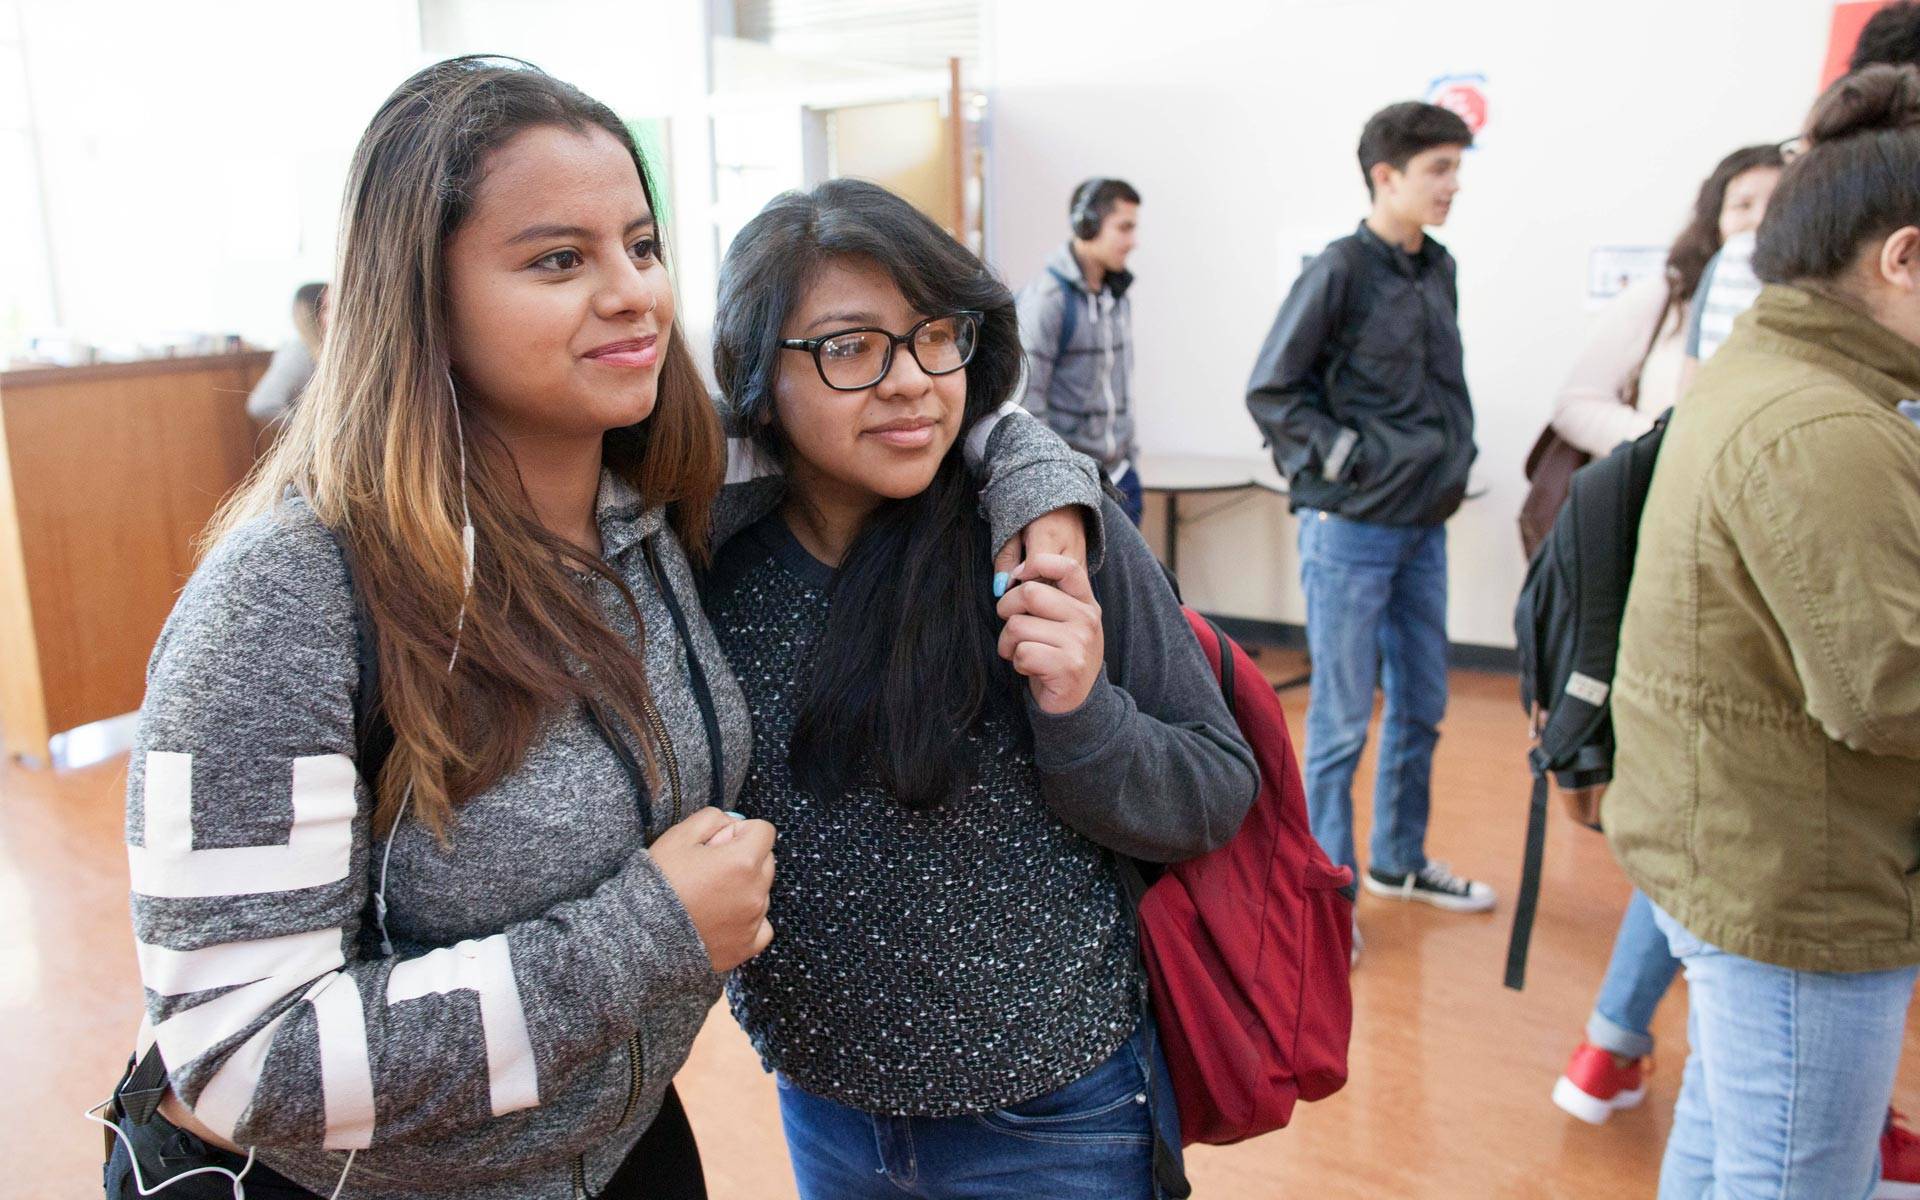 Alejandra (right), an undocumented high school student in Oakland, with a friend.  Courtesy Undocumented Lives